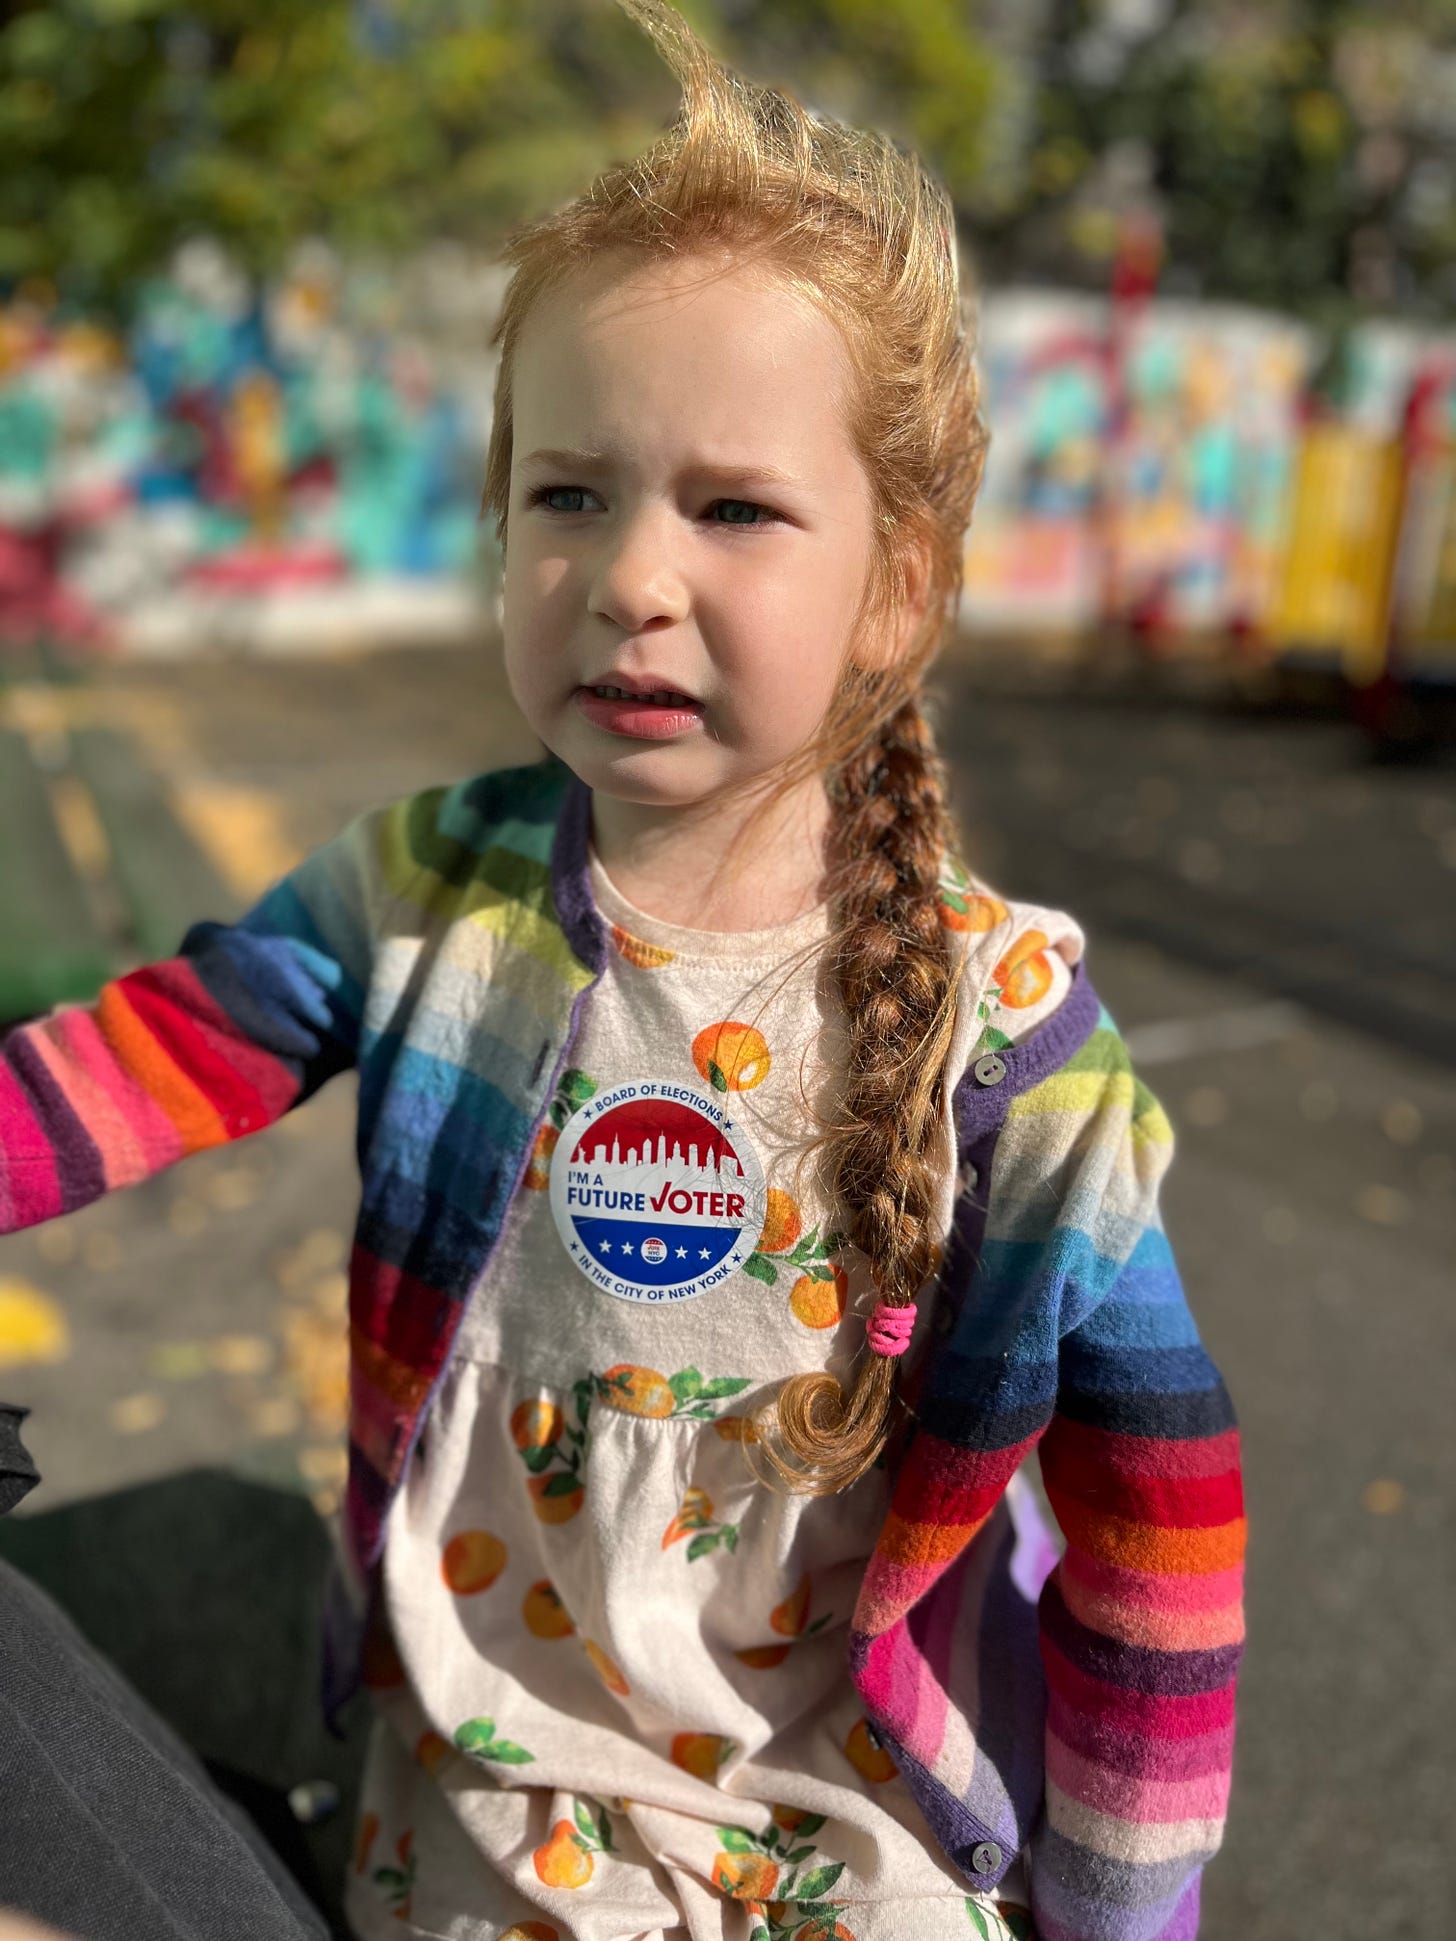 Mirah, a then 5-year-old girl in a rainbow striped cardigan, with a sticker on her chest that says “I’m a future voter”